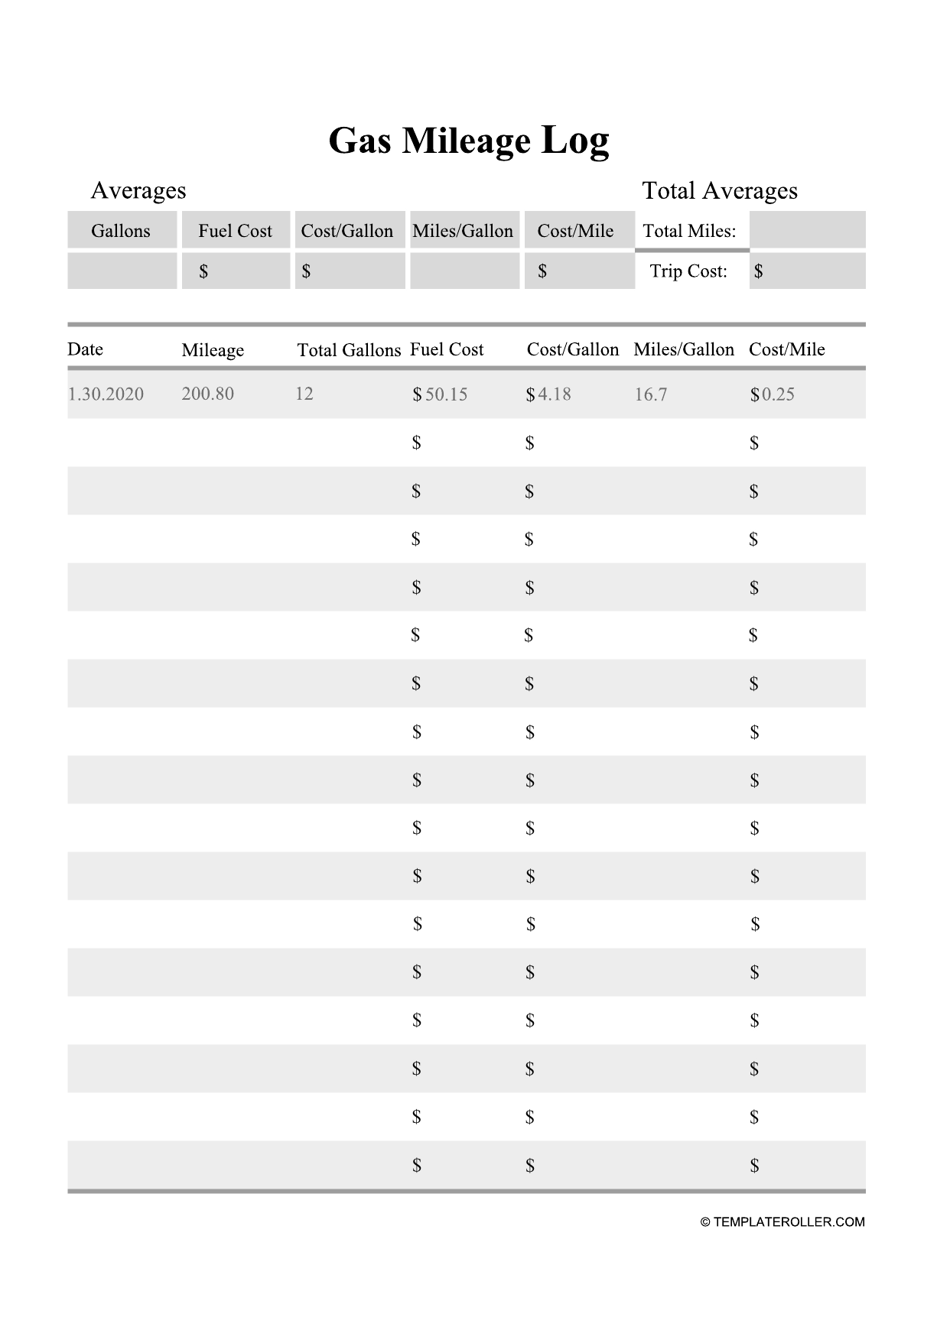 Gas Mileage Log Template, Page 1